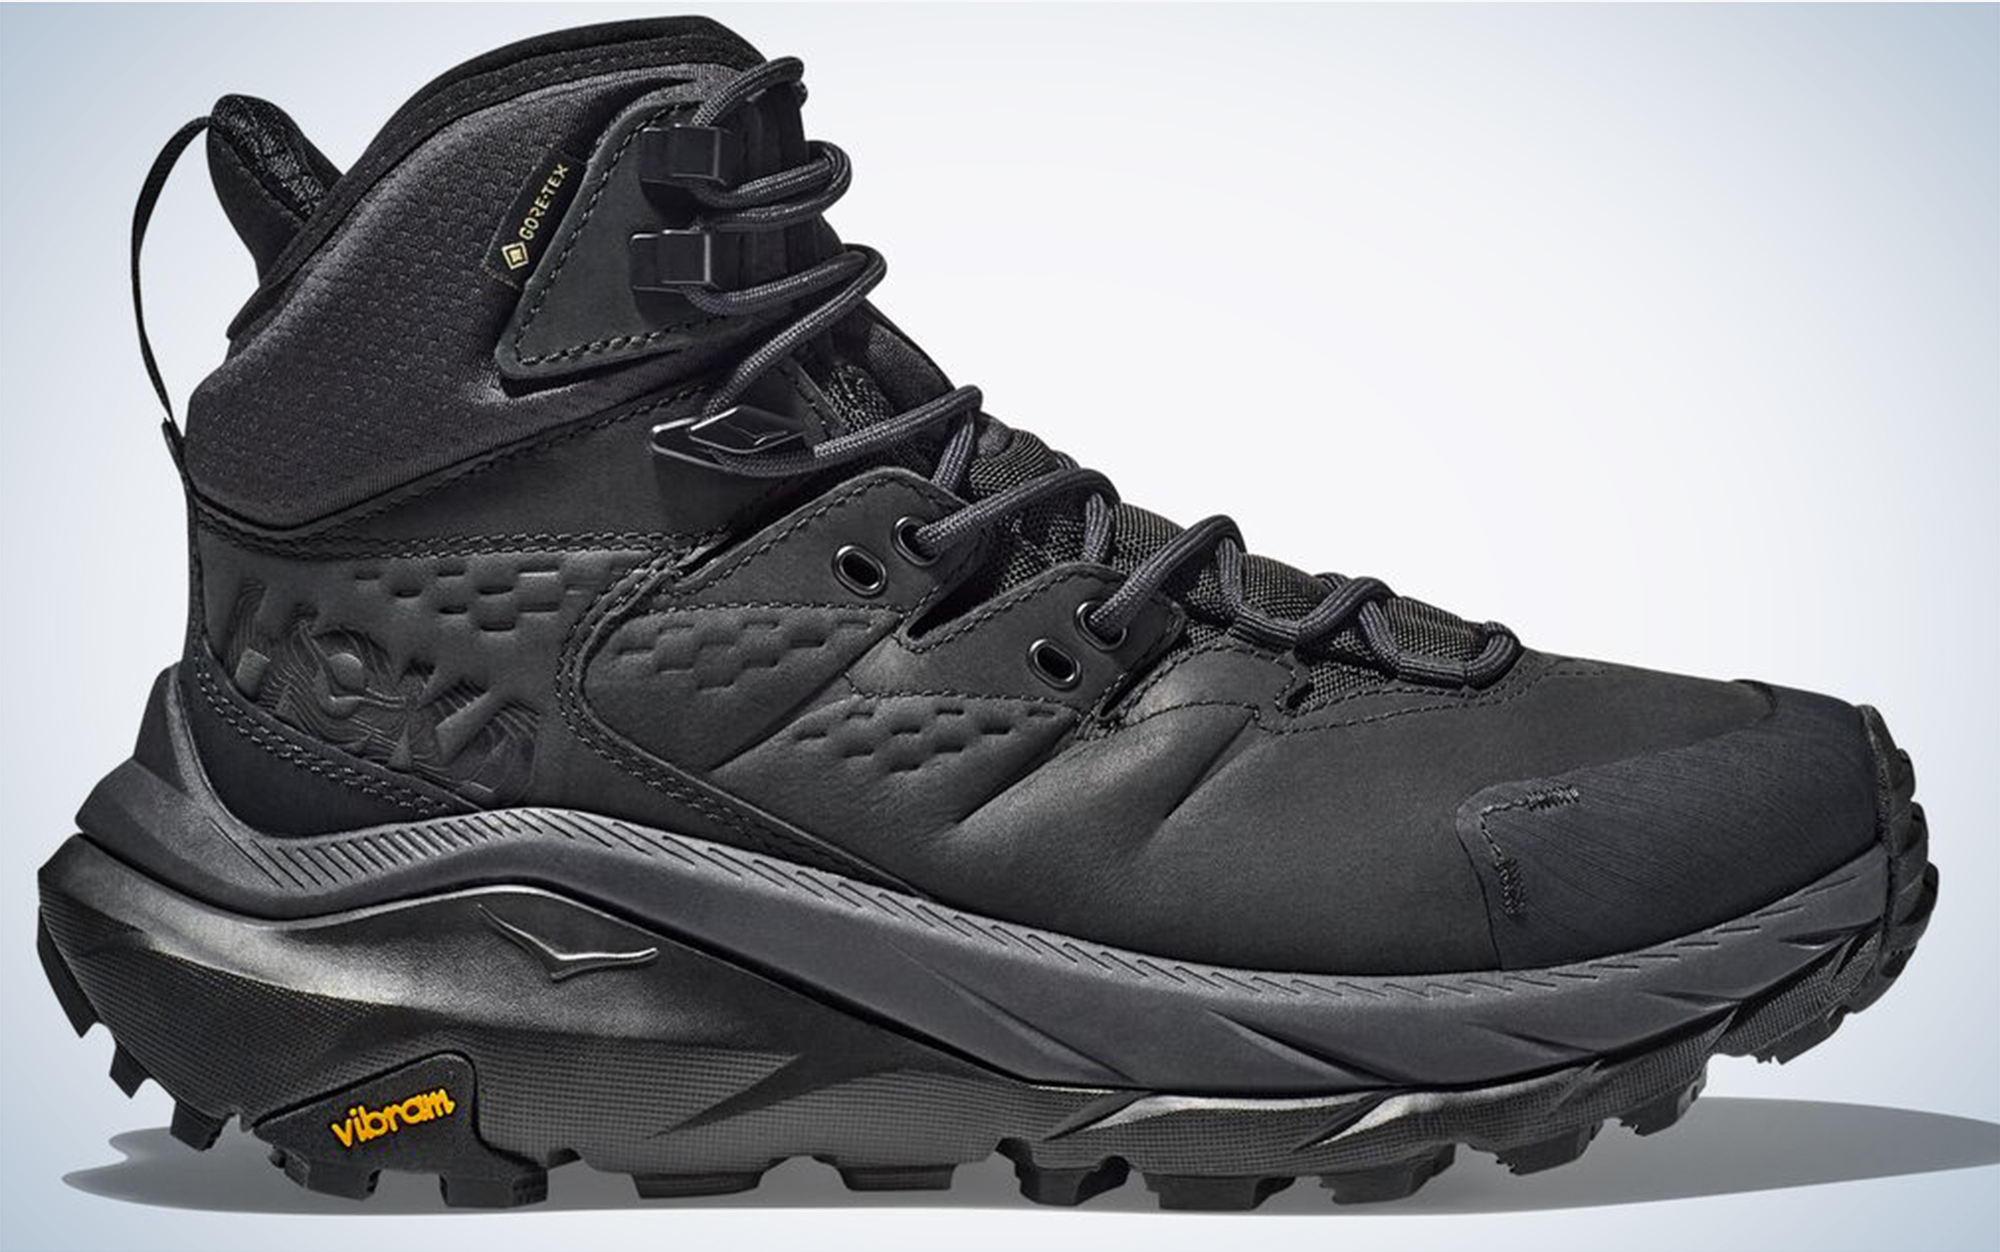 The Hoka Kaha GTX 2 are the best lightweight hiking boots for men.